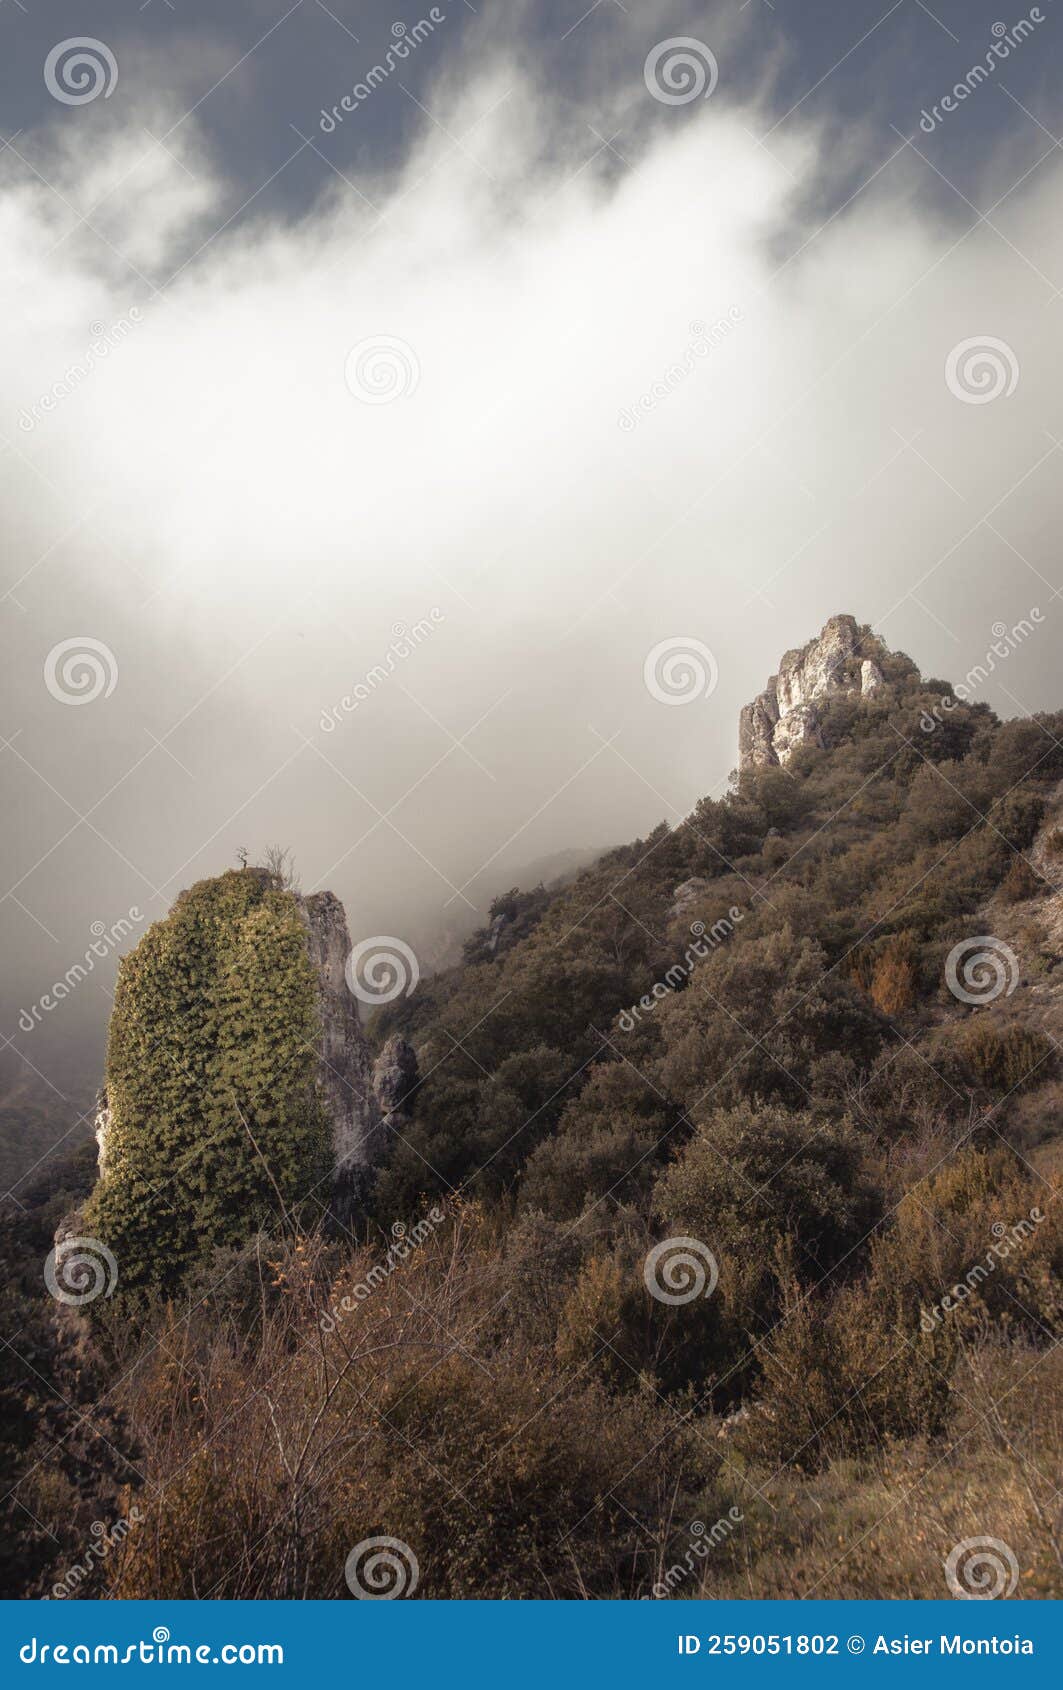 two rocks stand out among vegetation in the mountains of portilla - zabalate